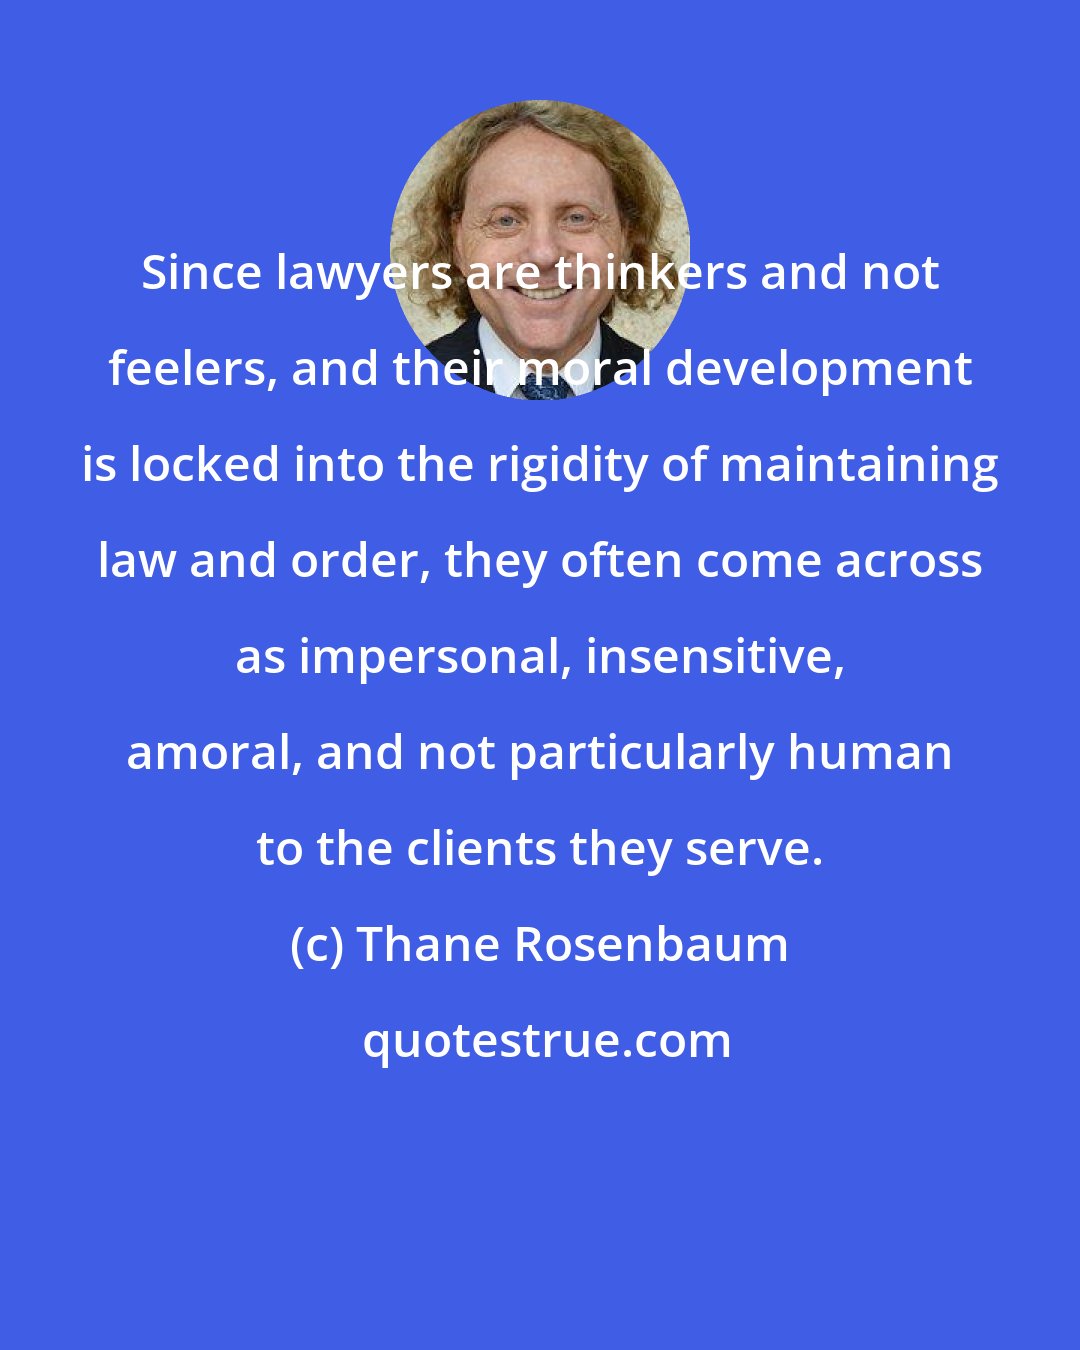 Thane Rosenbaum: Since lawyers are thinkers and not feelers, and their moral development is locked into the rigidity of maintaining law and order, they often come across as impersonal, insensitive, amoral, and not particularly human to the clients they serve.